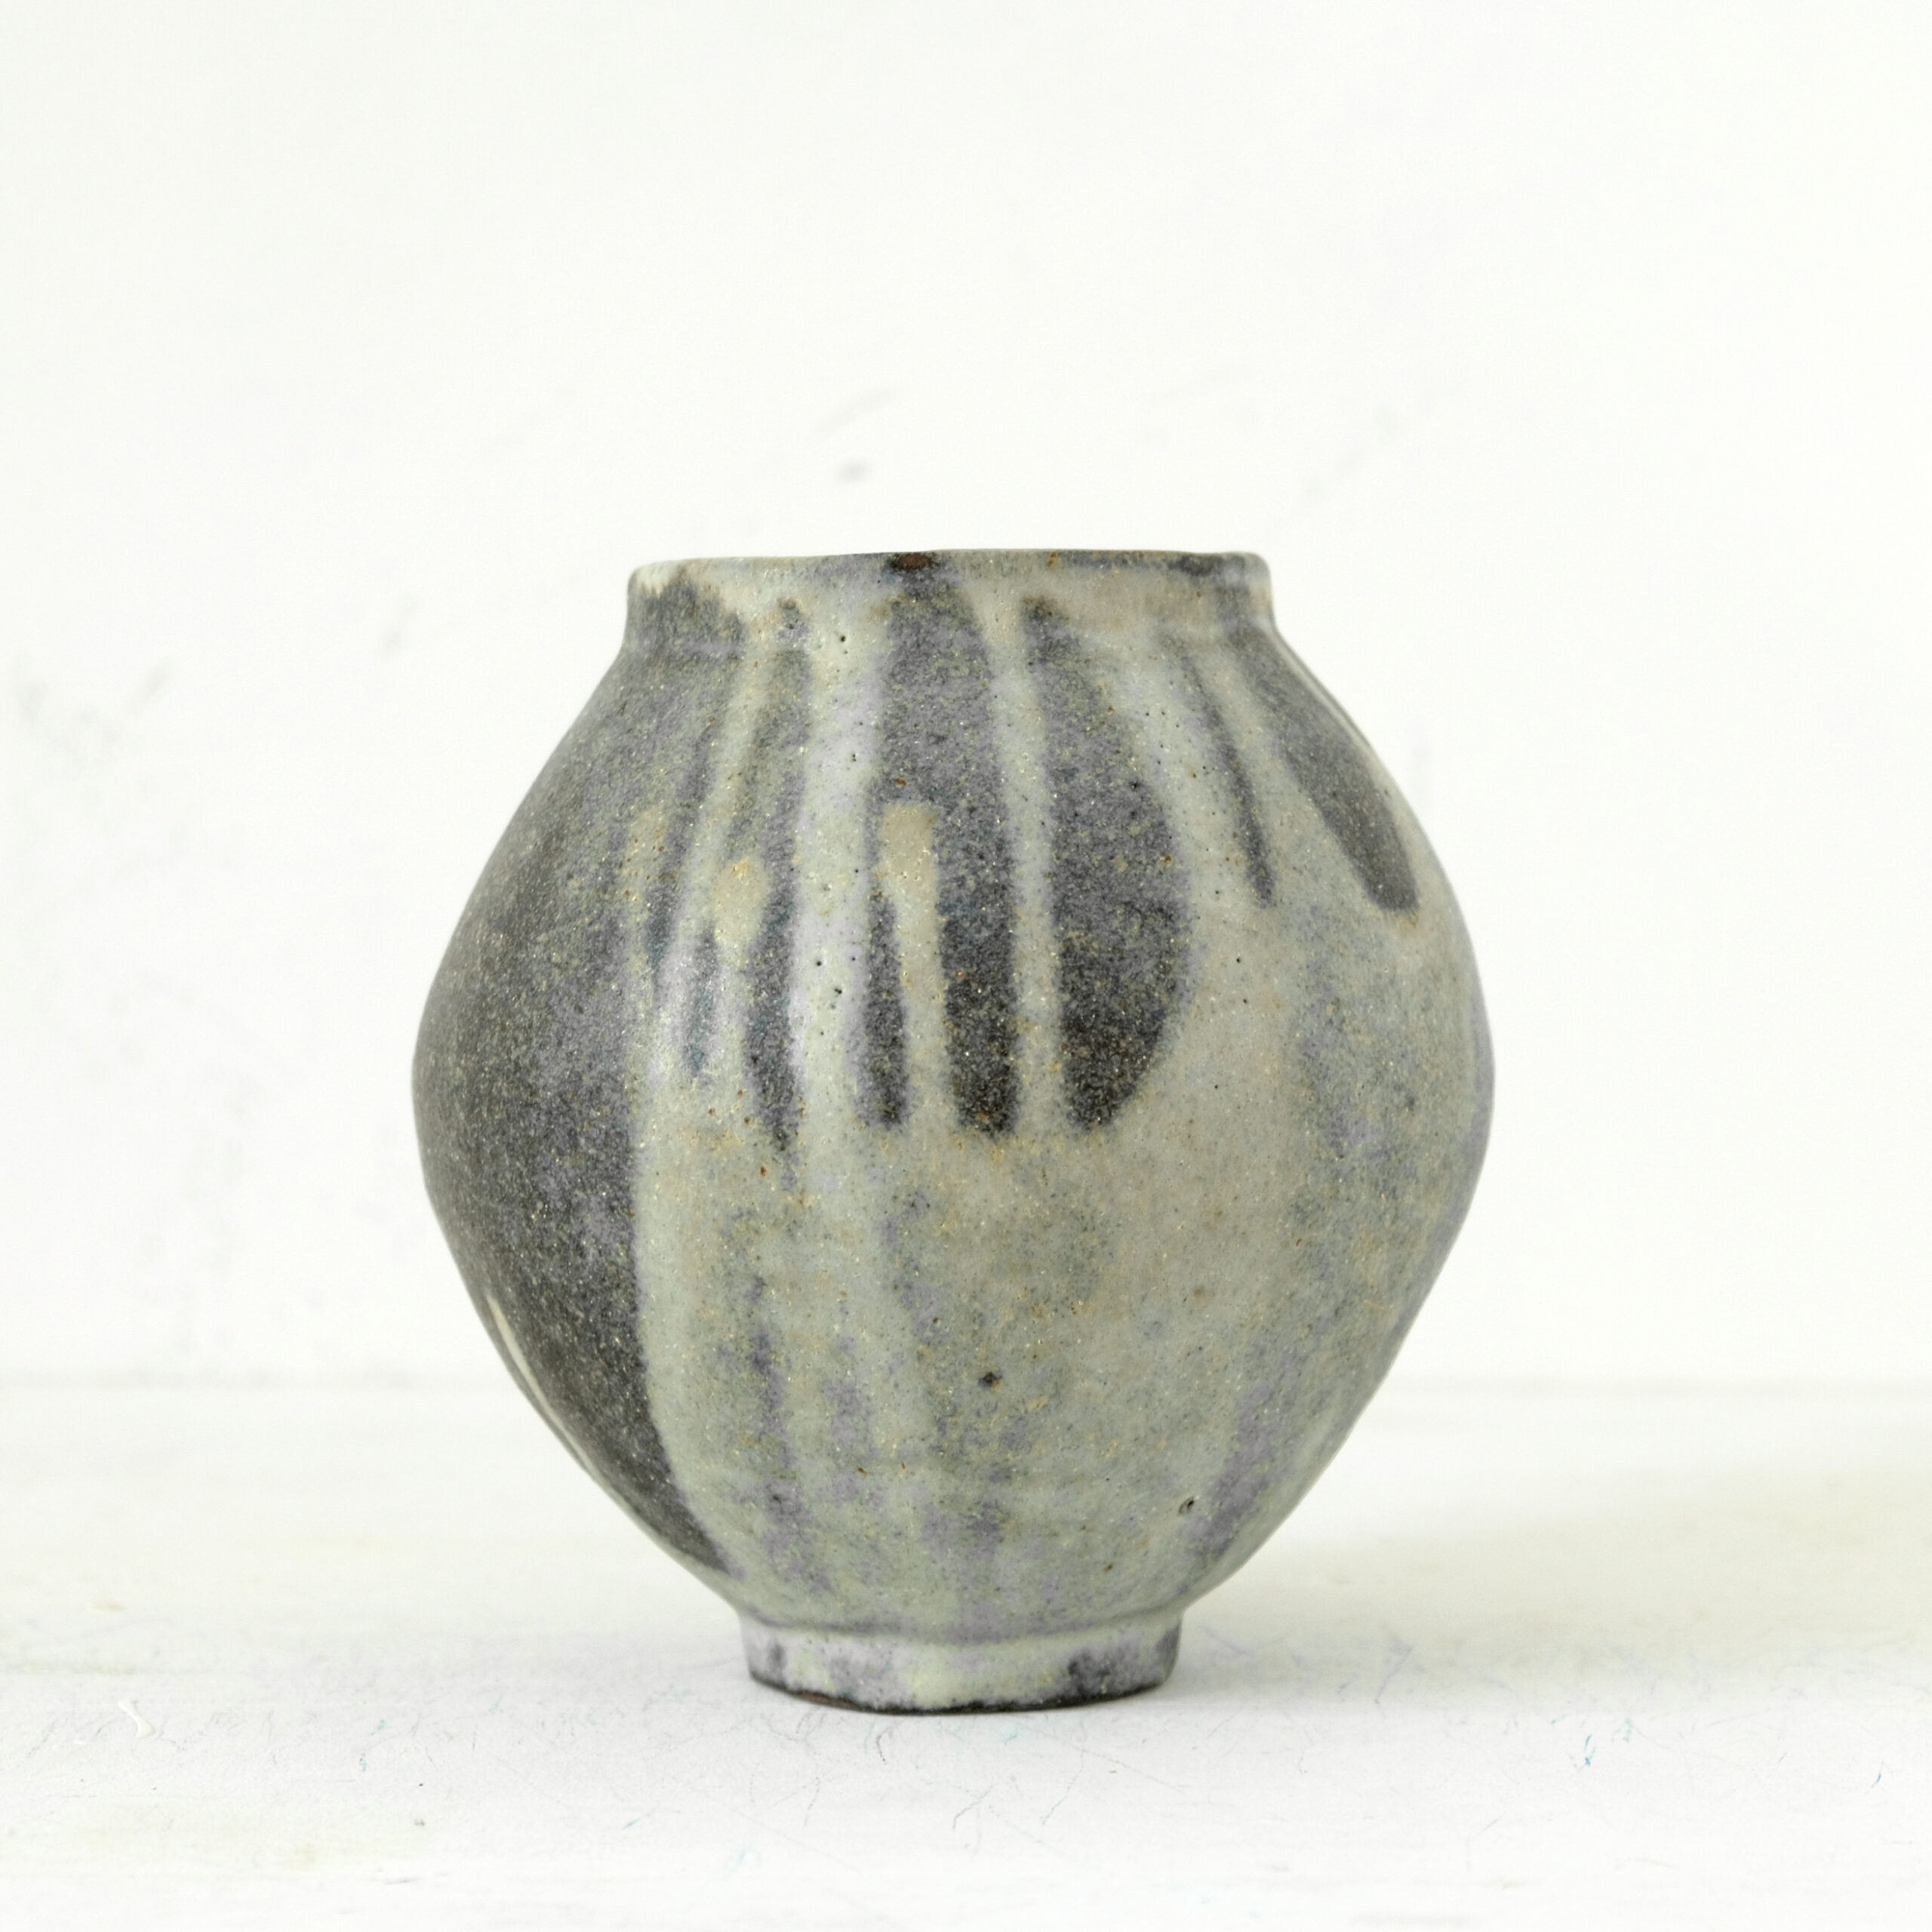 Nocturne moon jar H 16,5 cm Wild glaze from the Pyrenees